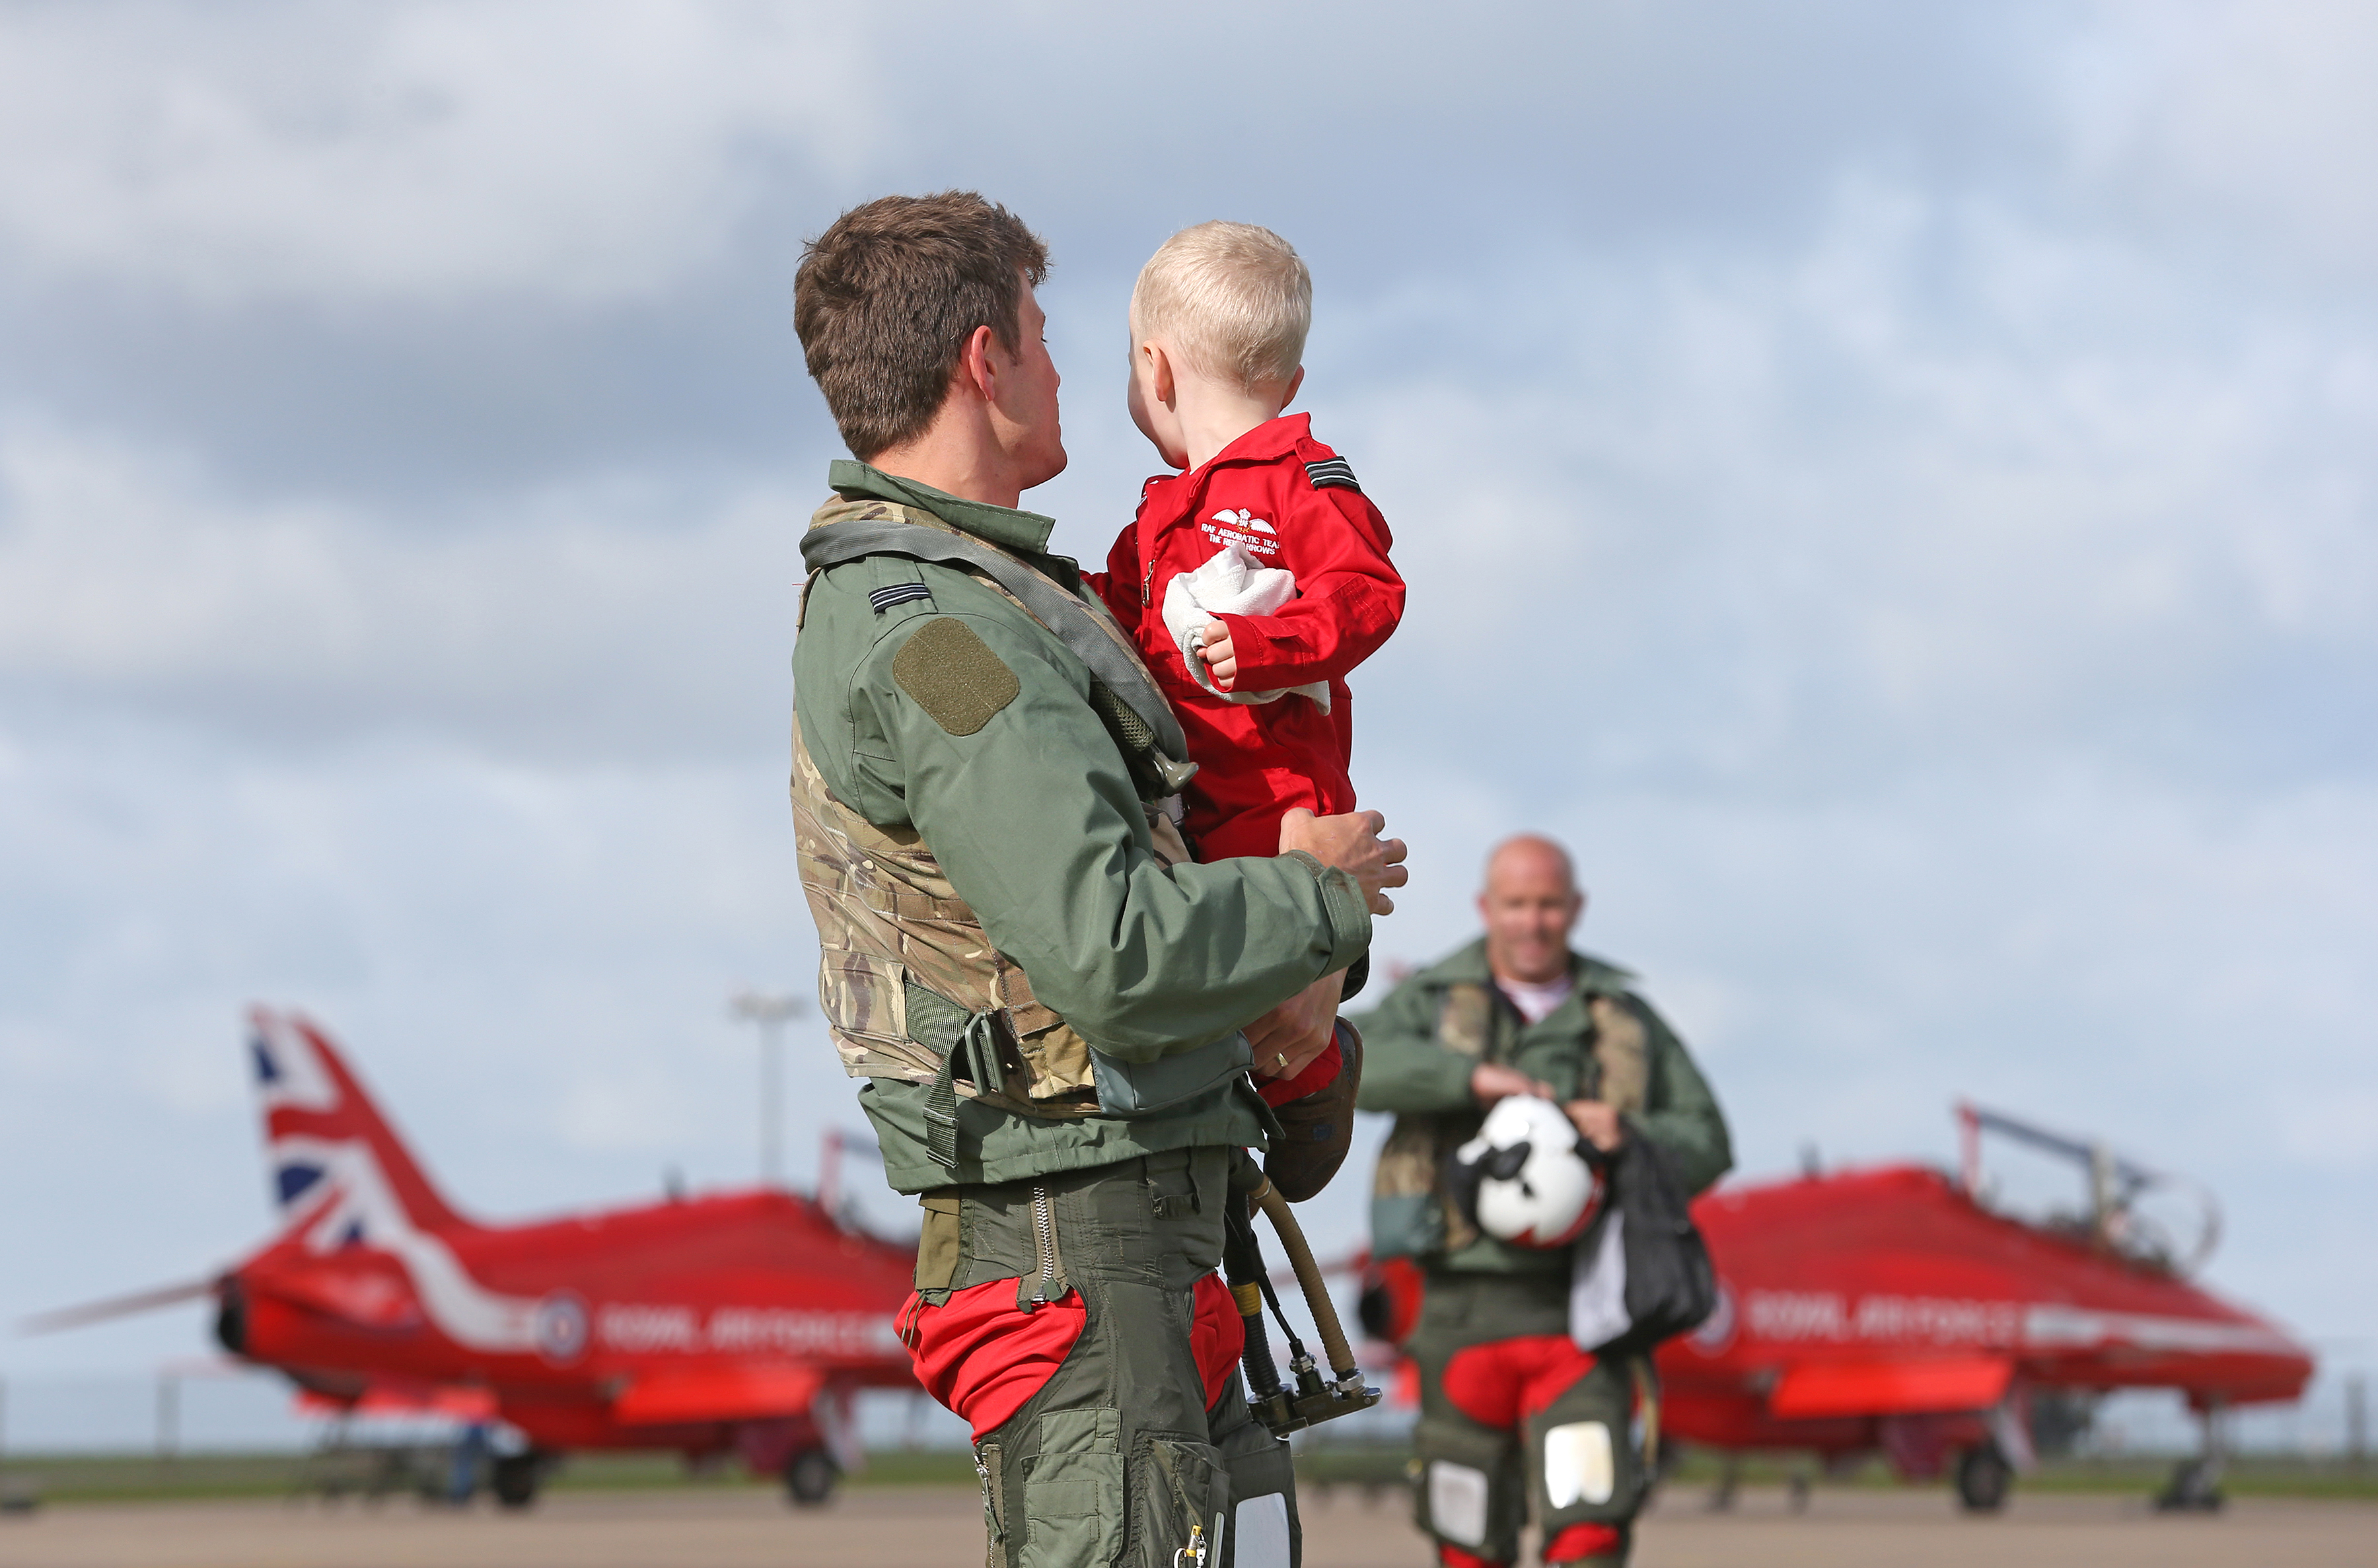 Red Arrow's pilot holds son, with another pilot and two Hawk T1's in the background.